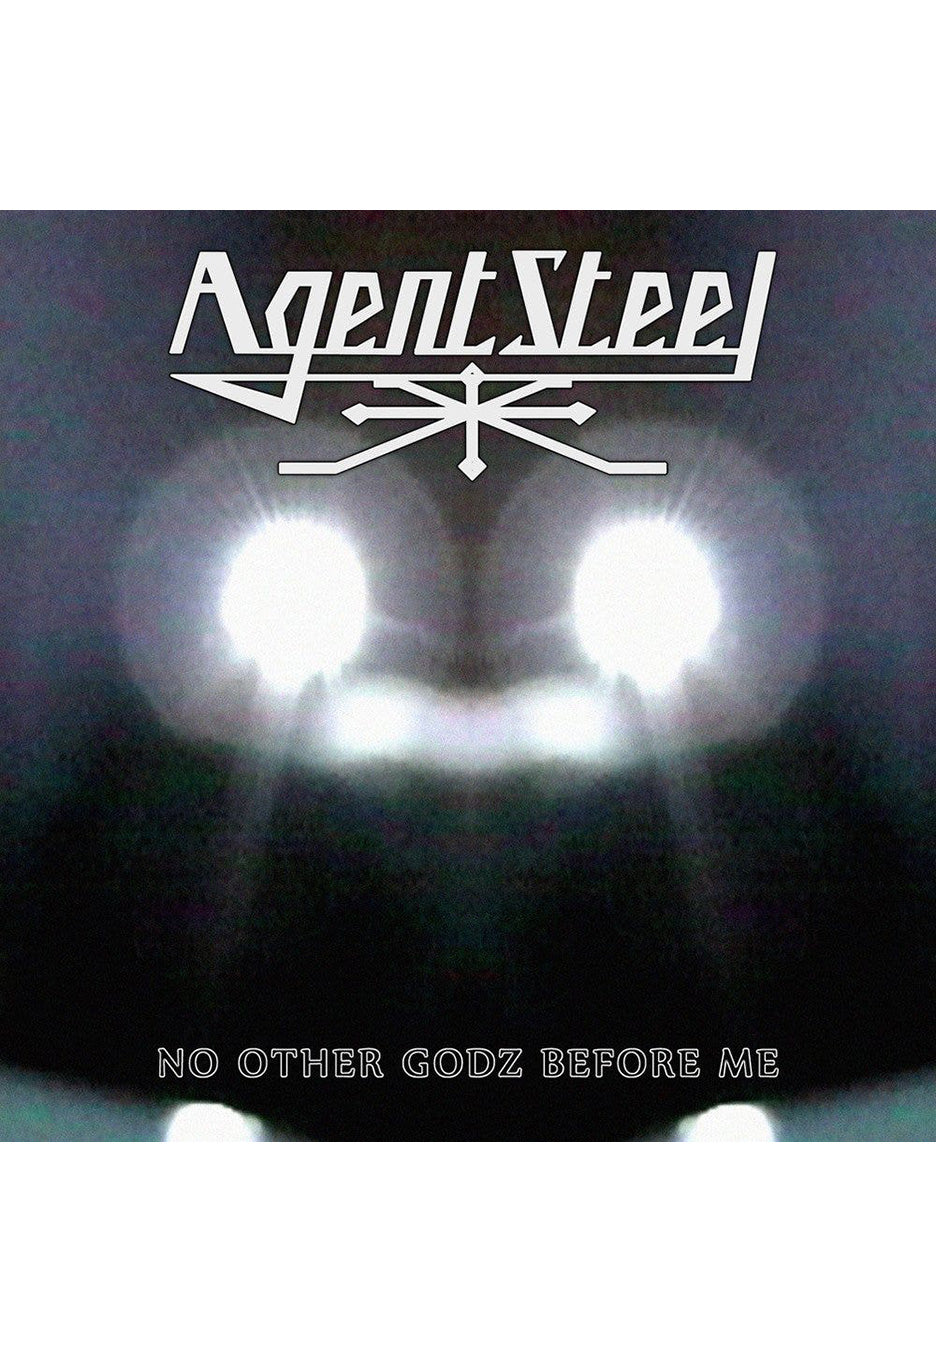 Agent Steel - No Other Godz Before Me - 2 Vinyl